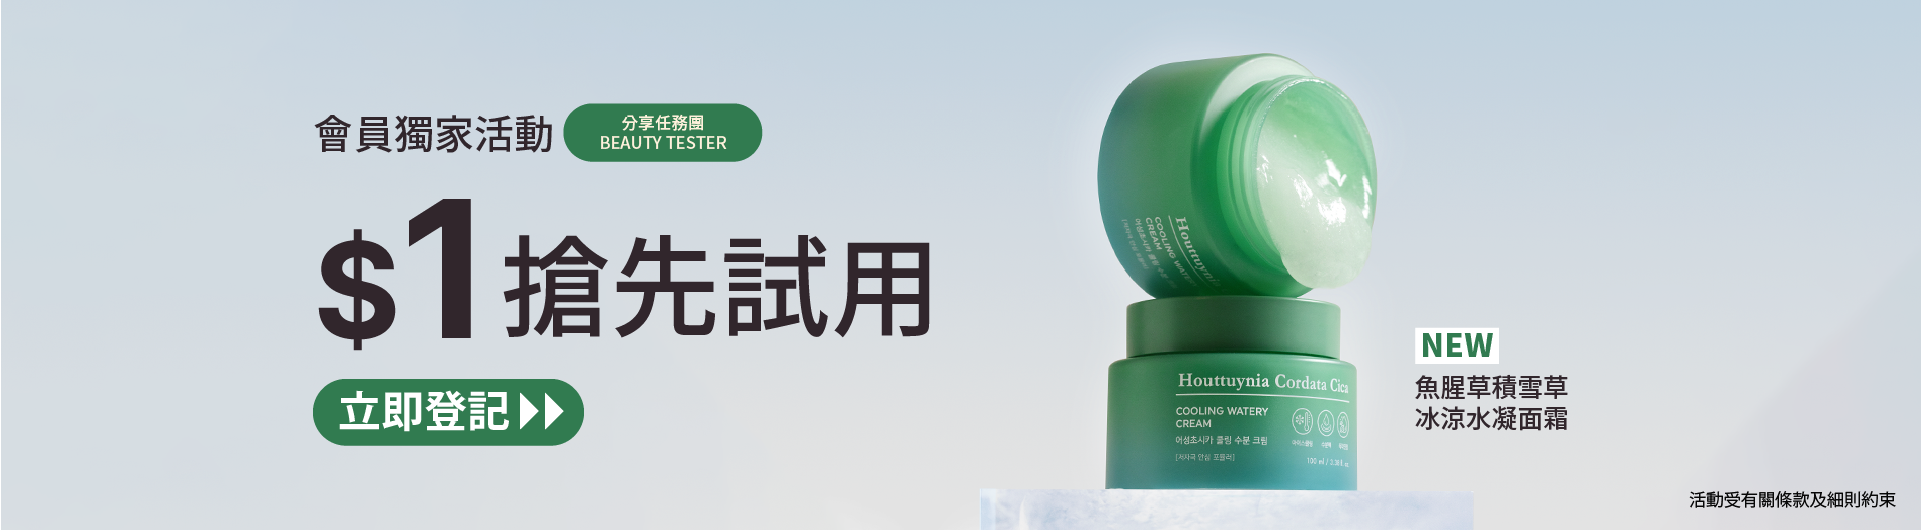 [Event ended] BEAUTY TESTER EVENT- Houttuynia Cordata Cica Cooling Watery Cream